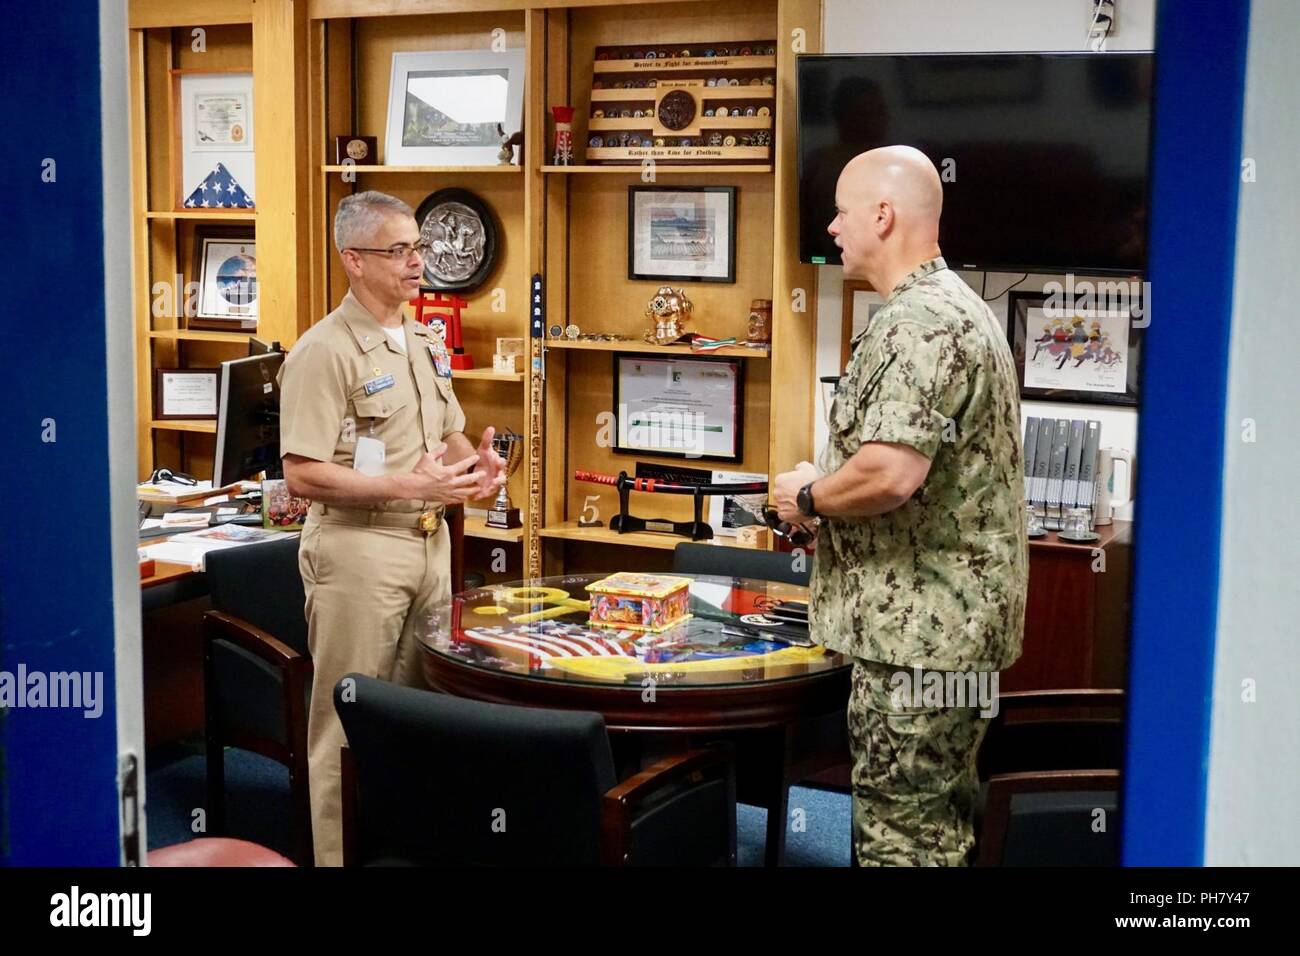 Force Master Chief Carter meeting with Commander many Cordero, Commanding Officer of Naval Computer and Telecommunications Station Sicily. Stock Photo